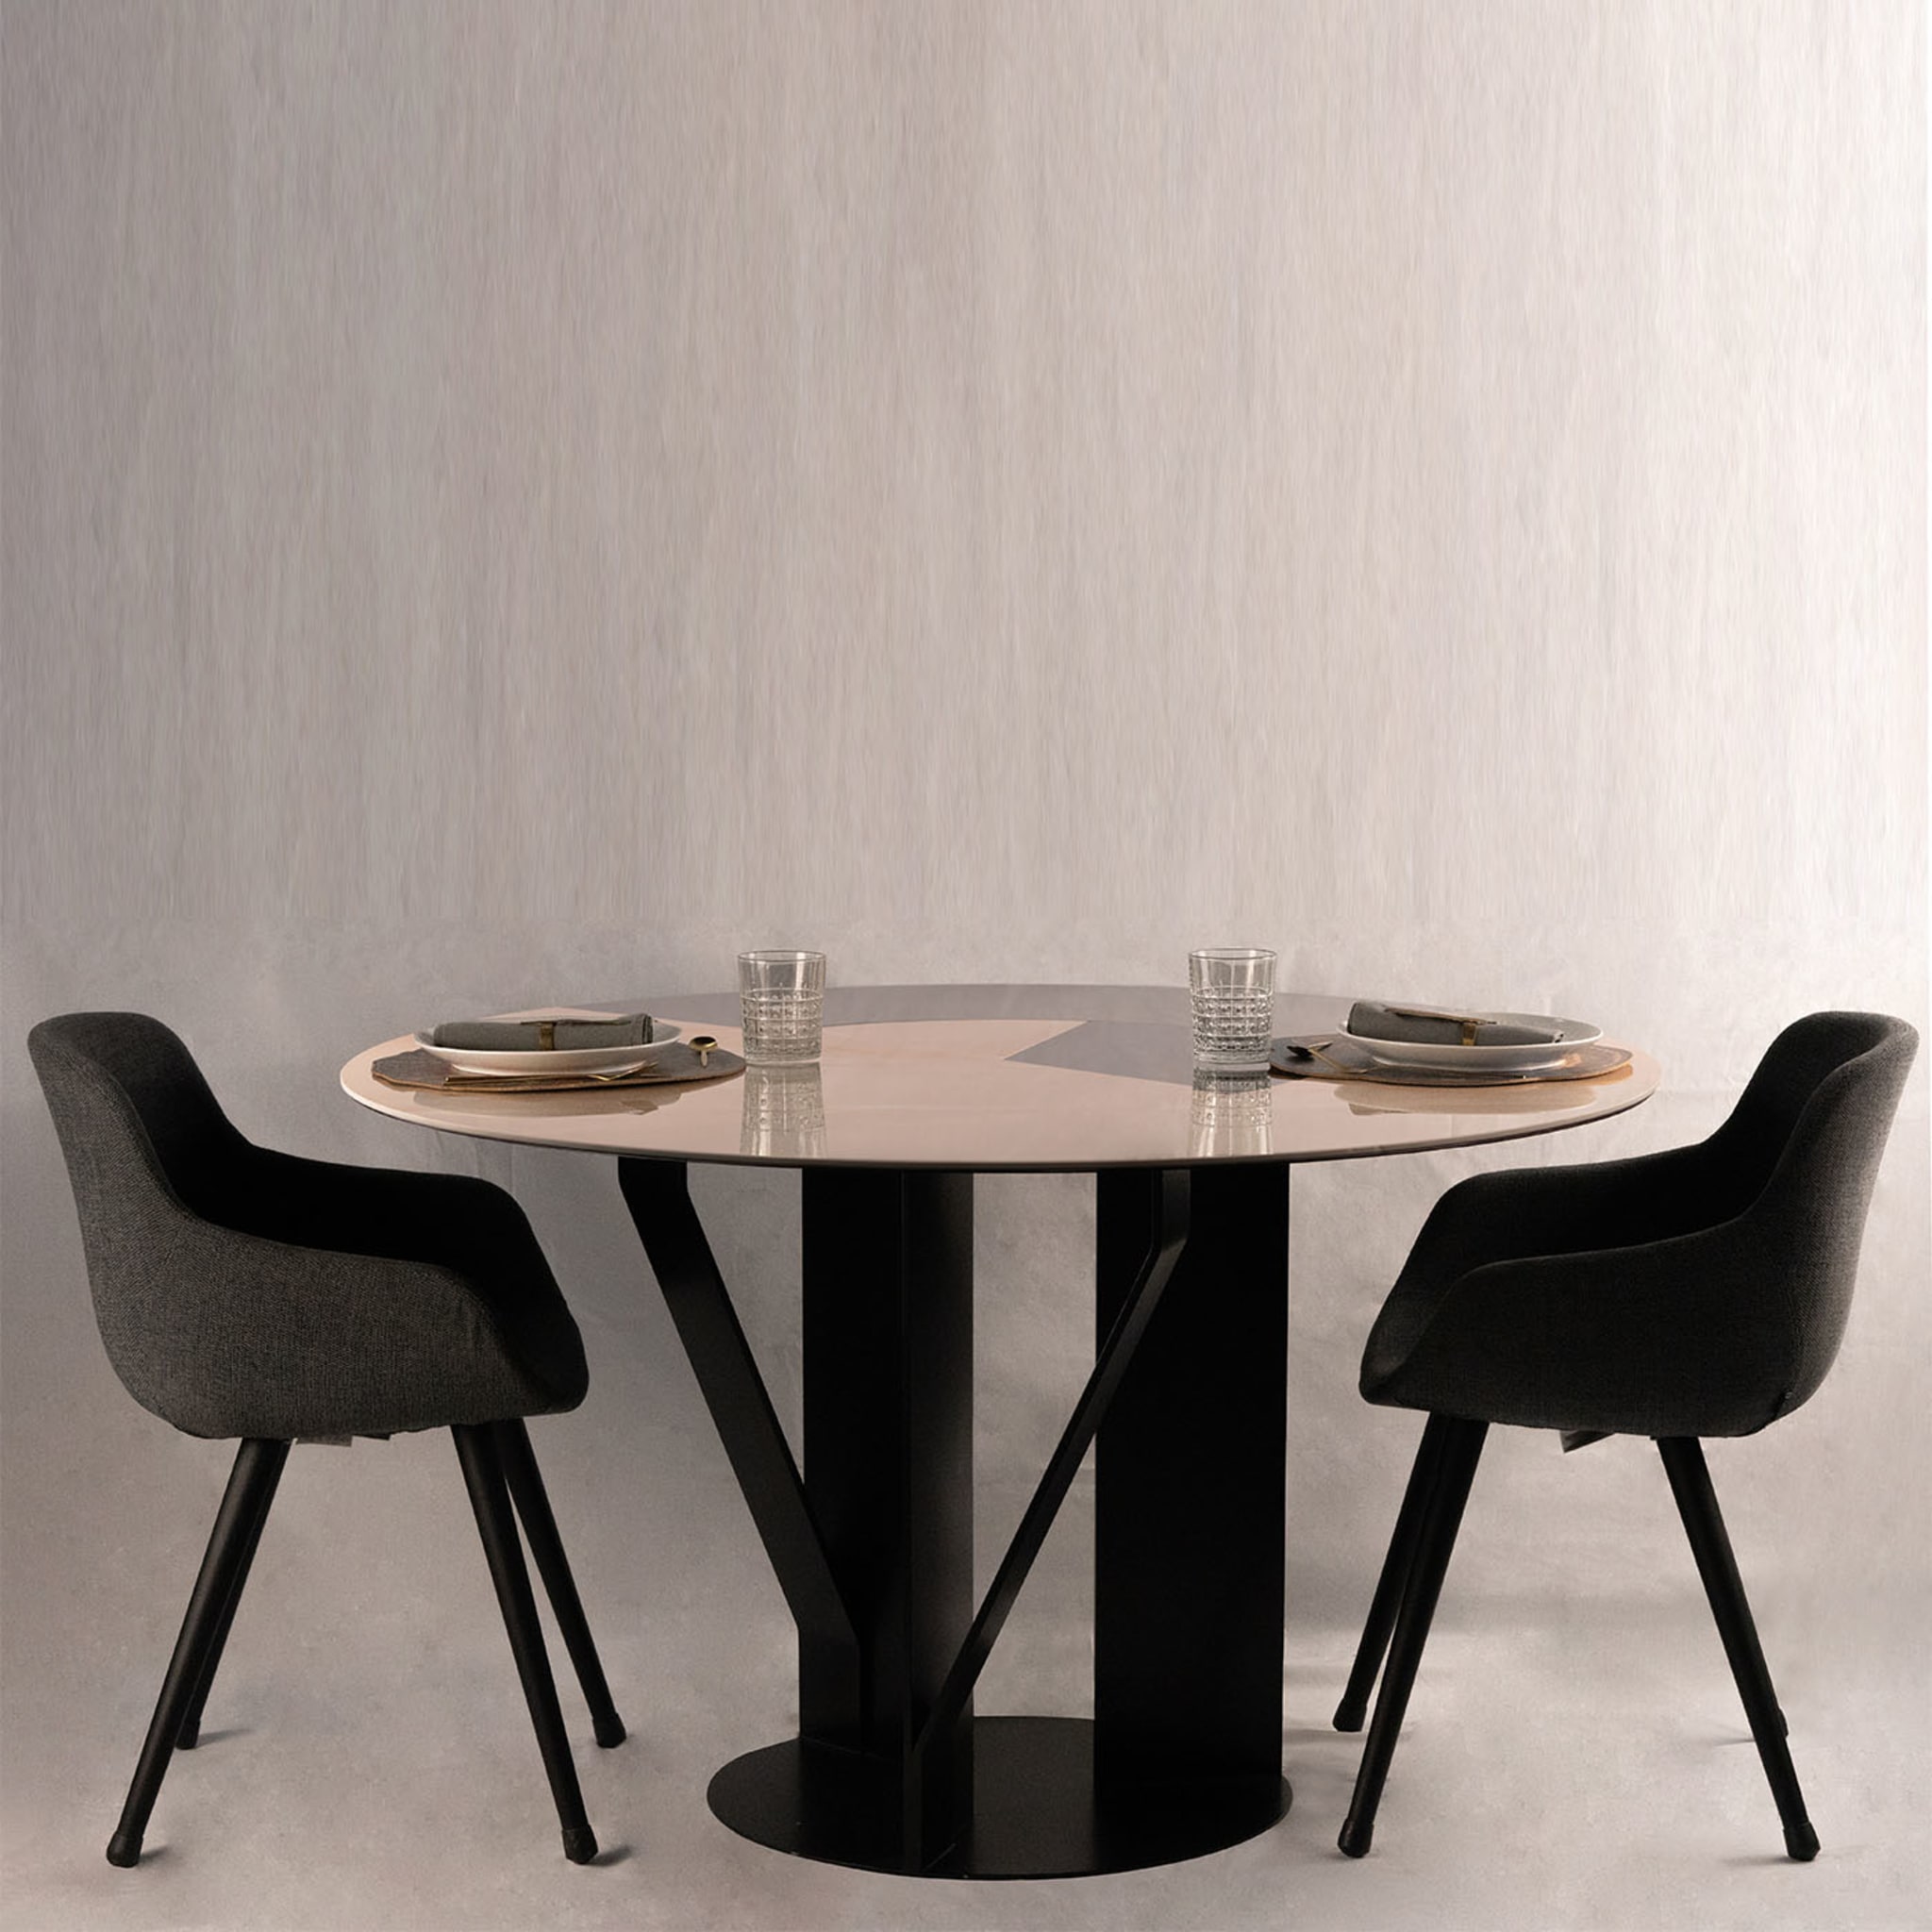 Yso Mom Round Dining Table by Sapiens Design - Alternative view 1